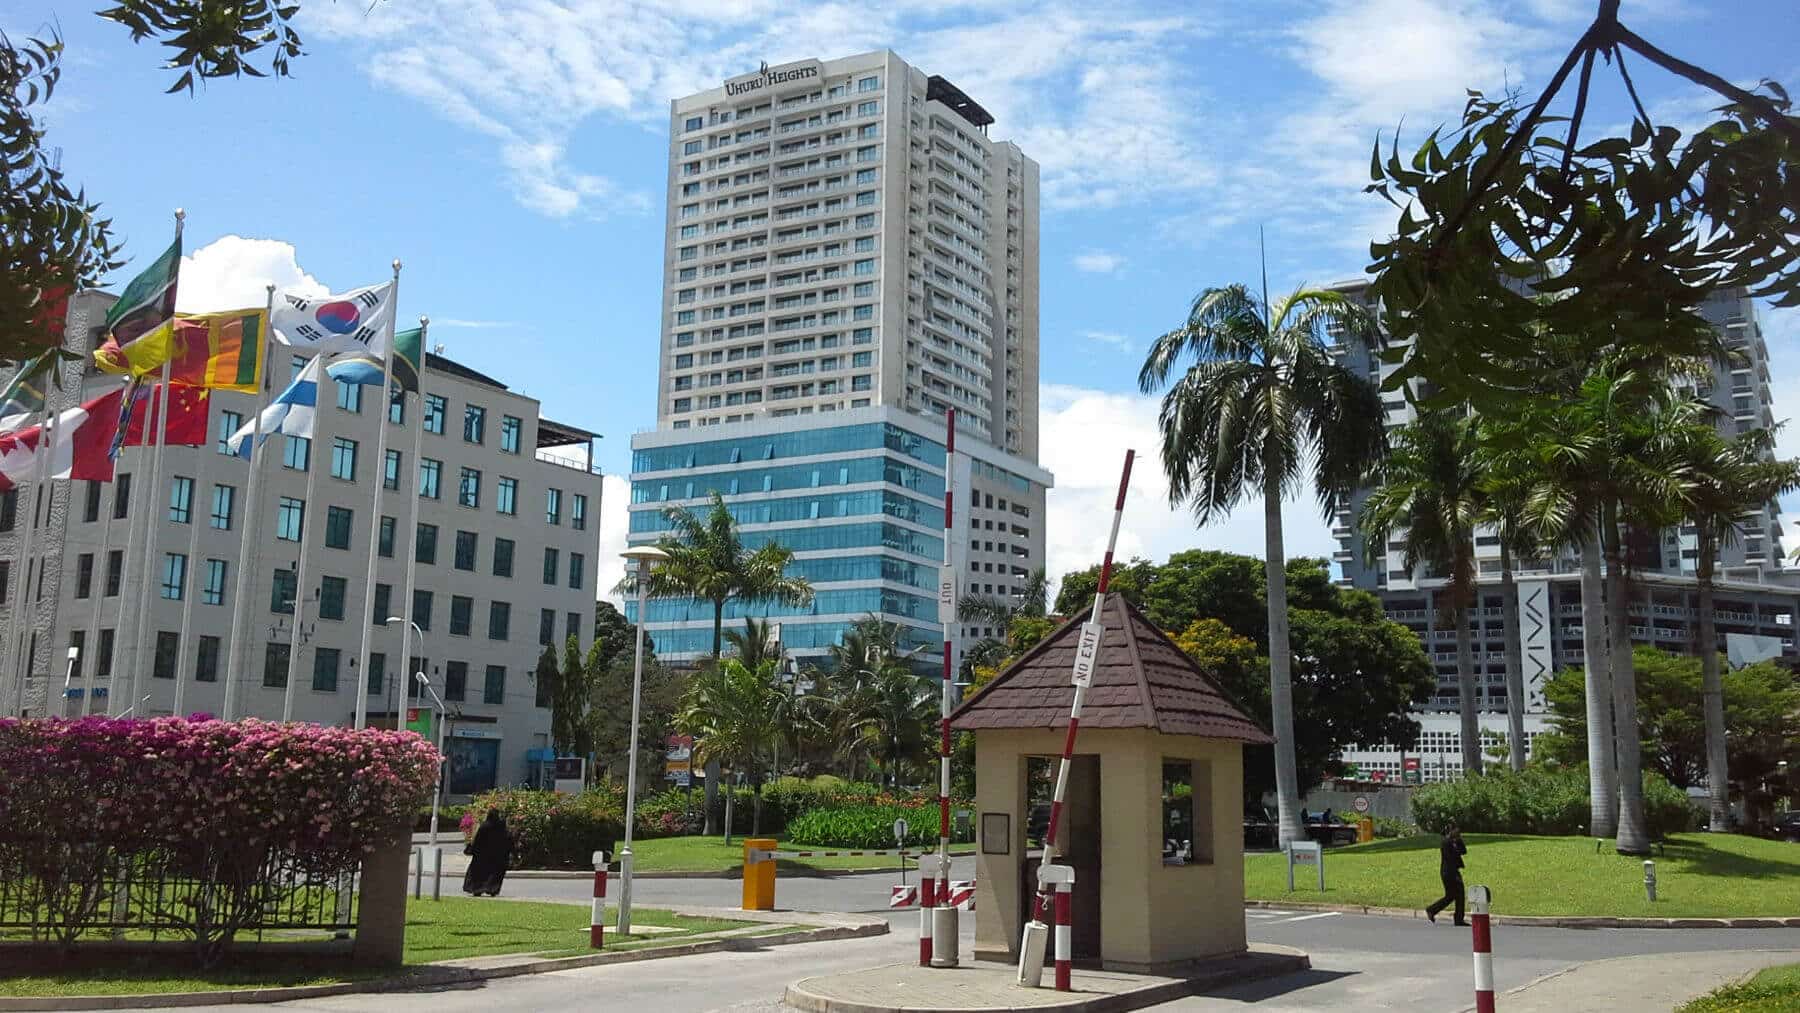 Business aera entrance, with the Uhuru Heights bulding in the backgroup